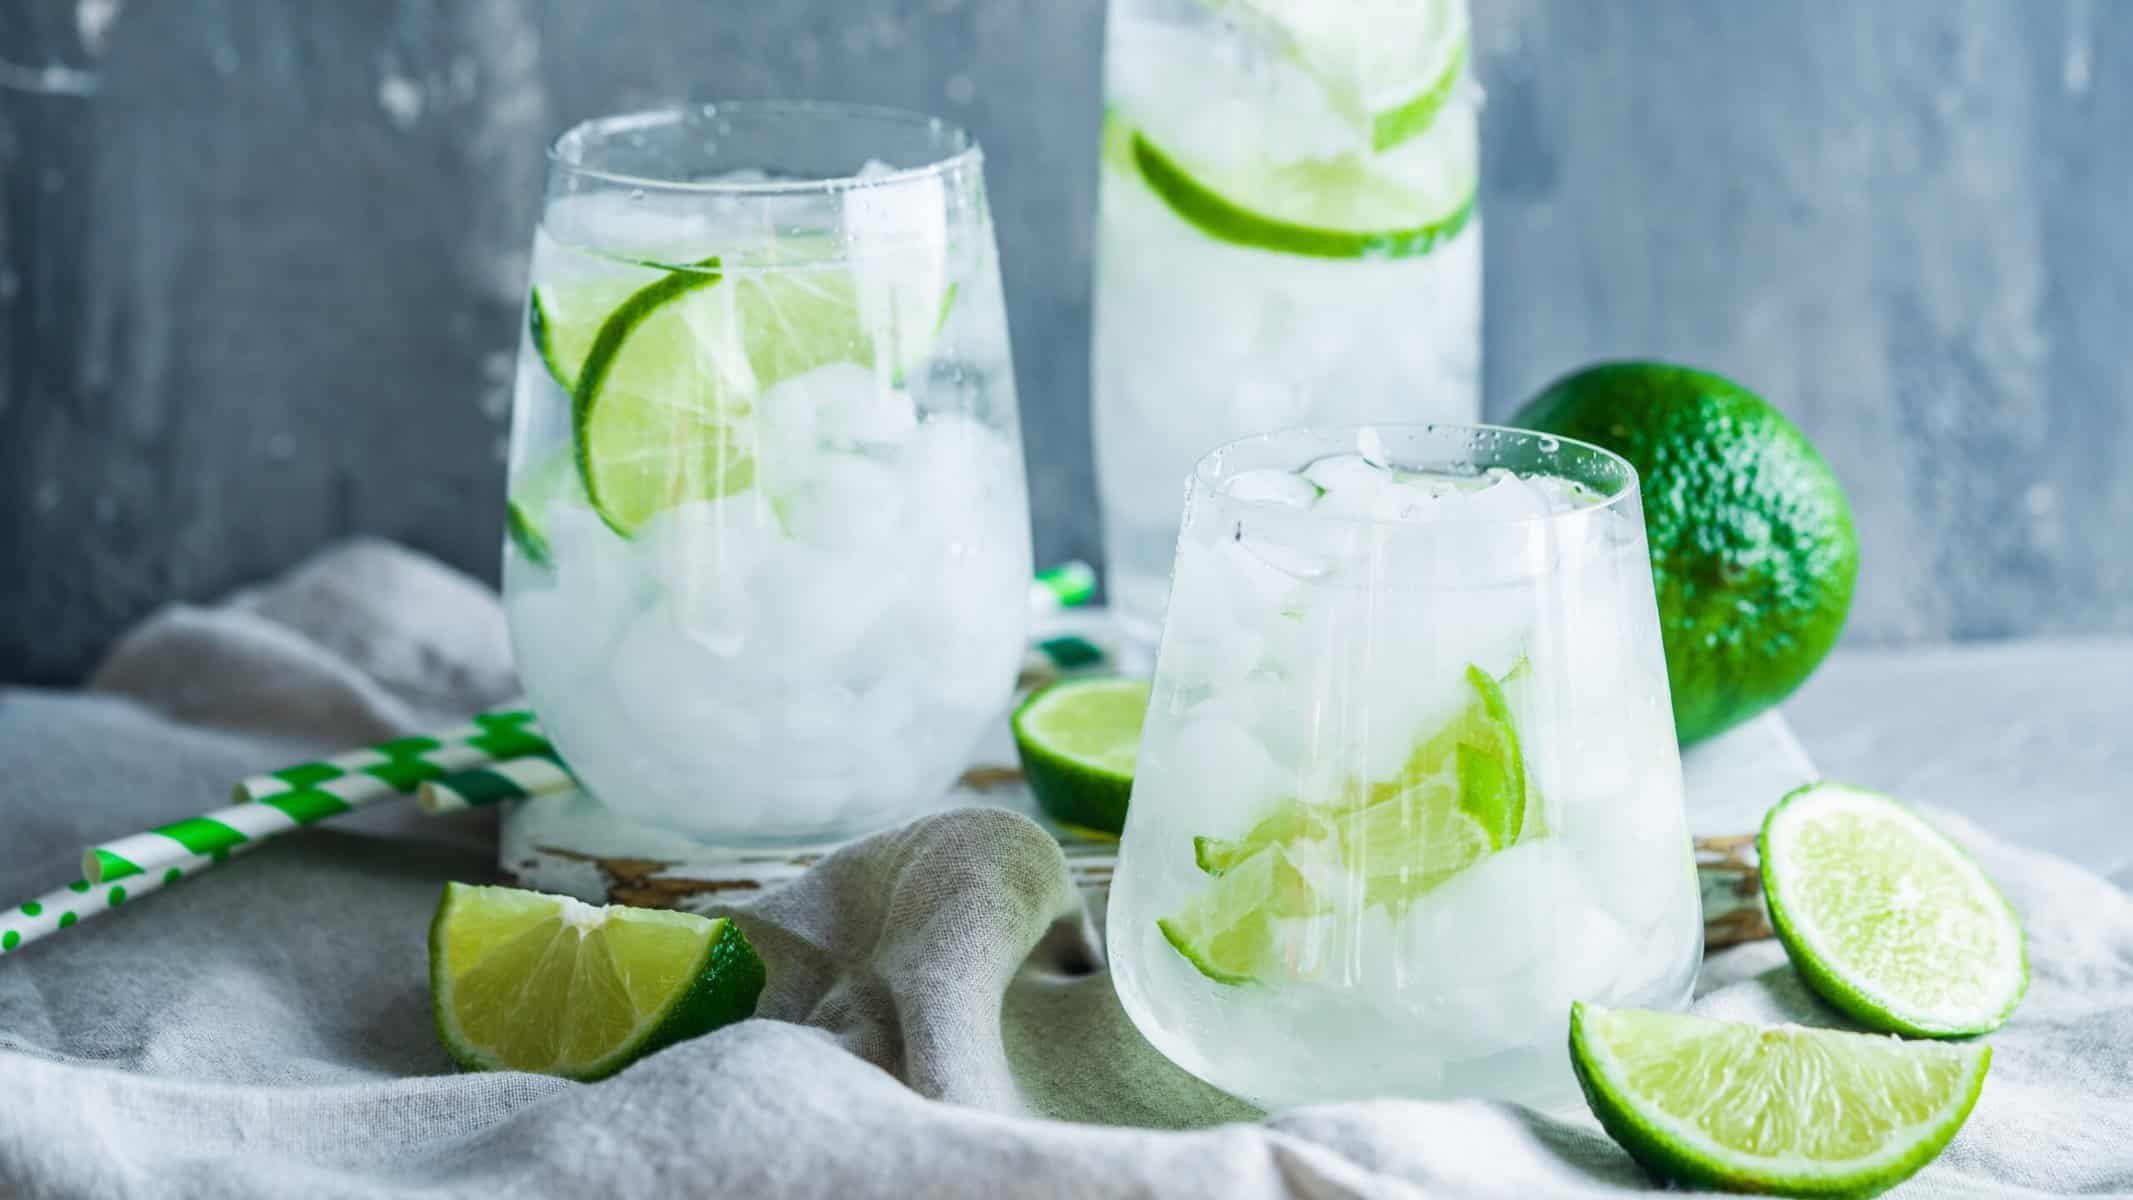  A refreshing classic: Gin & Tonic with a twist